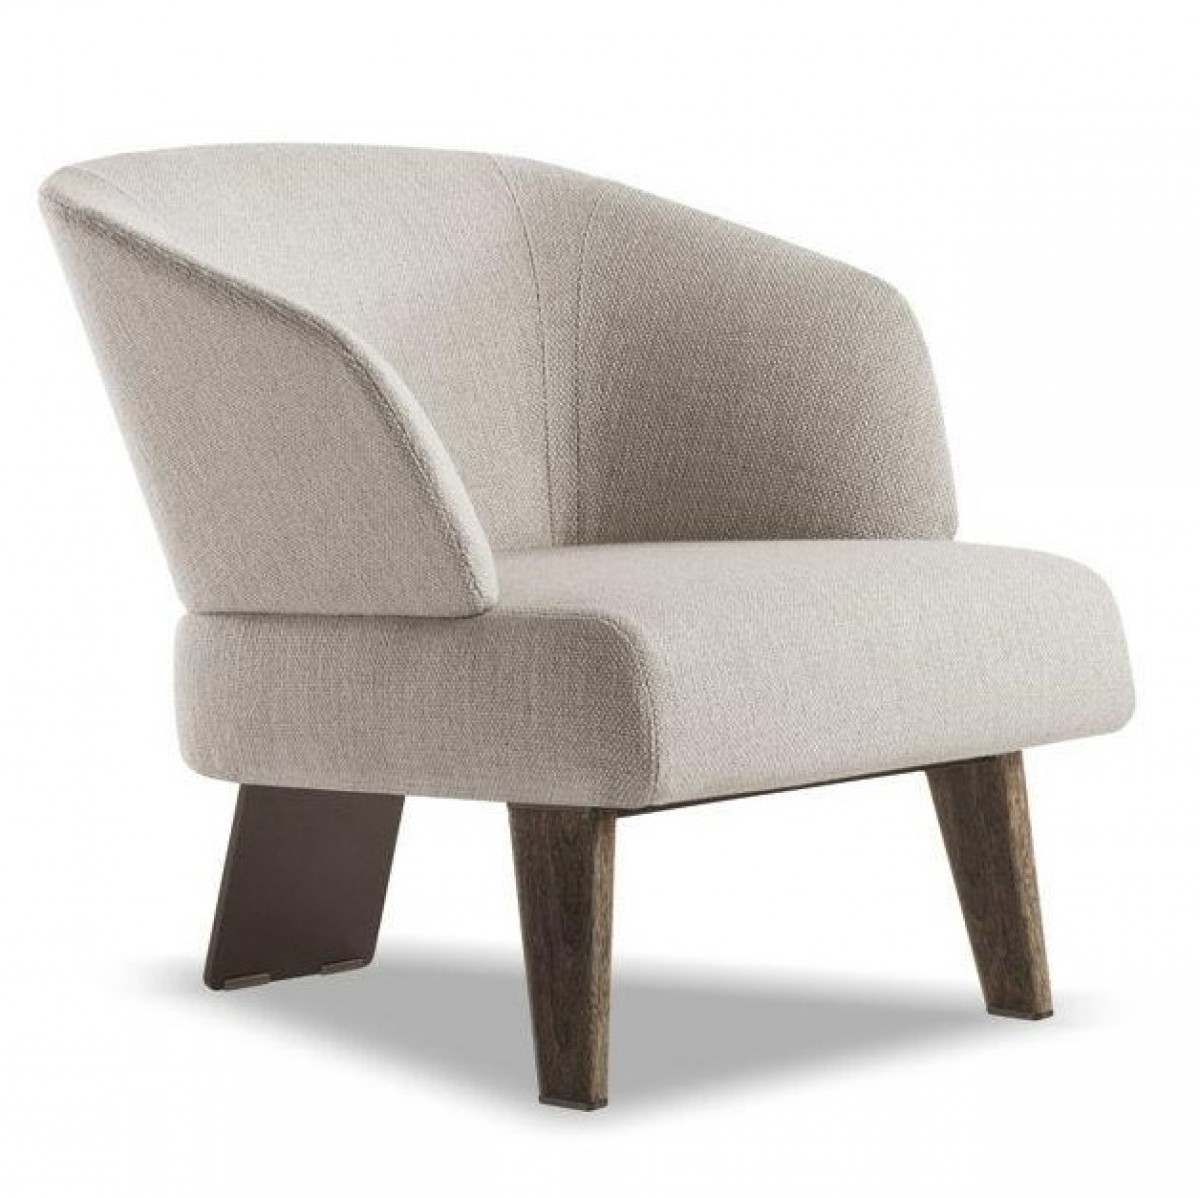 Reeves SMALL Armchair - Fixed